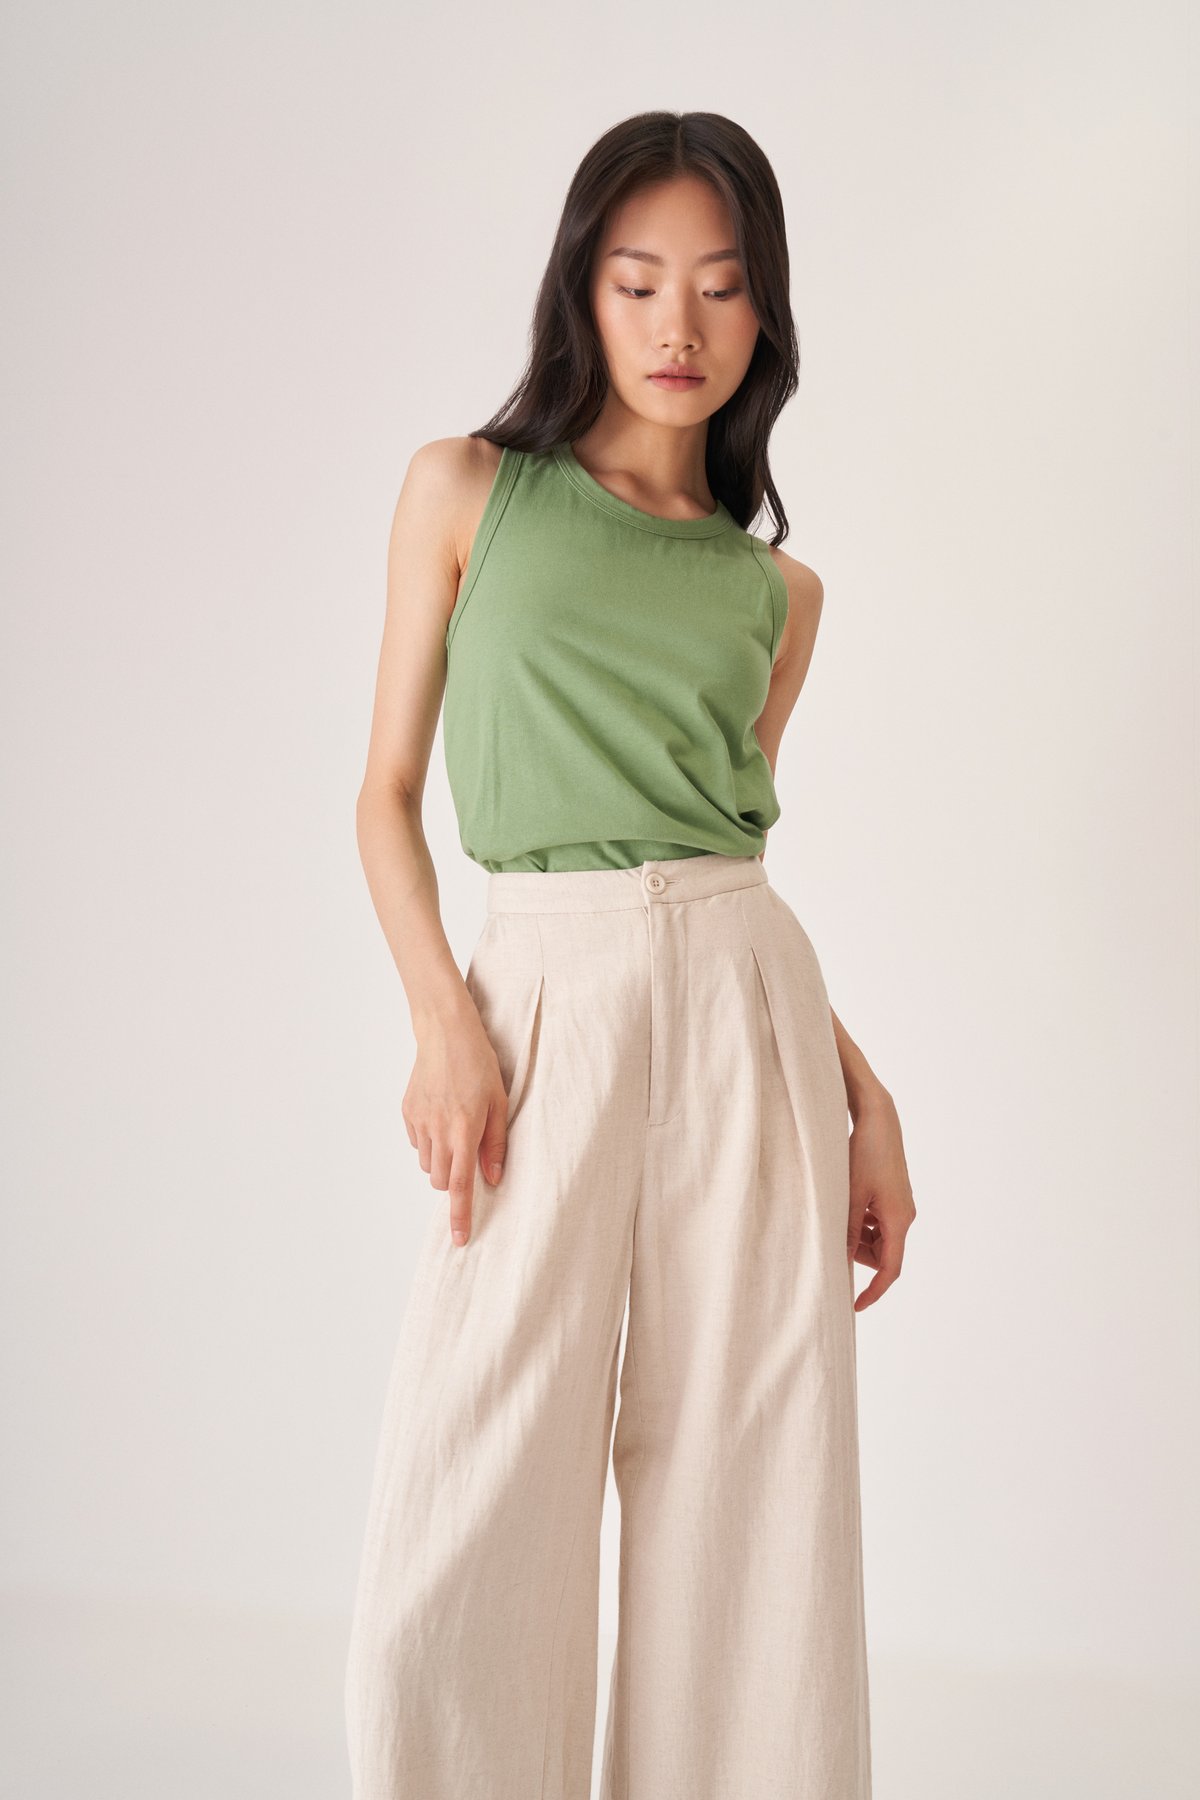 Buy Flared Boho Pants, Wide-leg Linen Trousers, High Waisted Pants, Maxi Linen  Trousers for Women, Heavy Linen Pants WANTED Online in India - Etsy